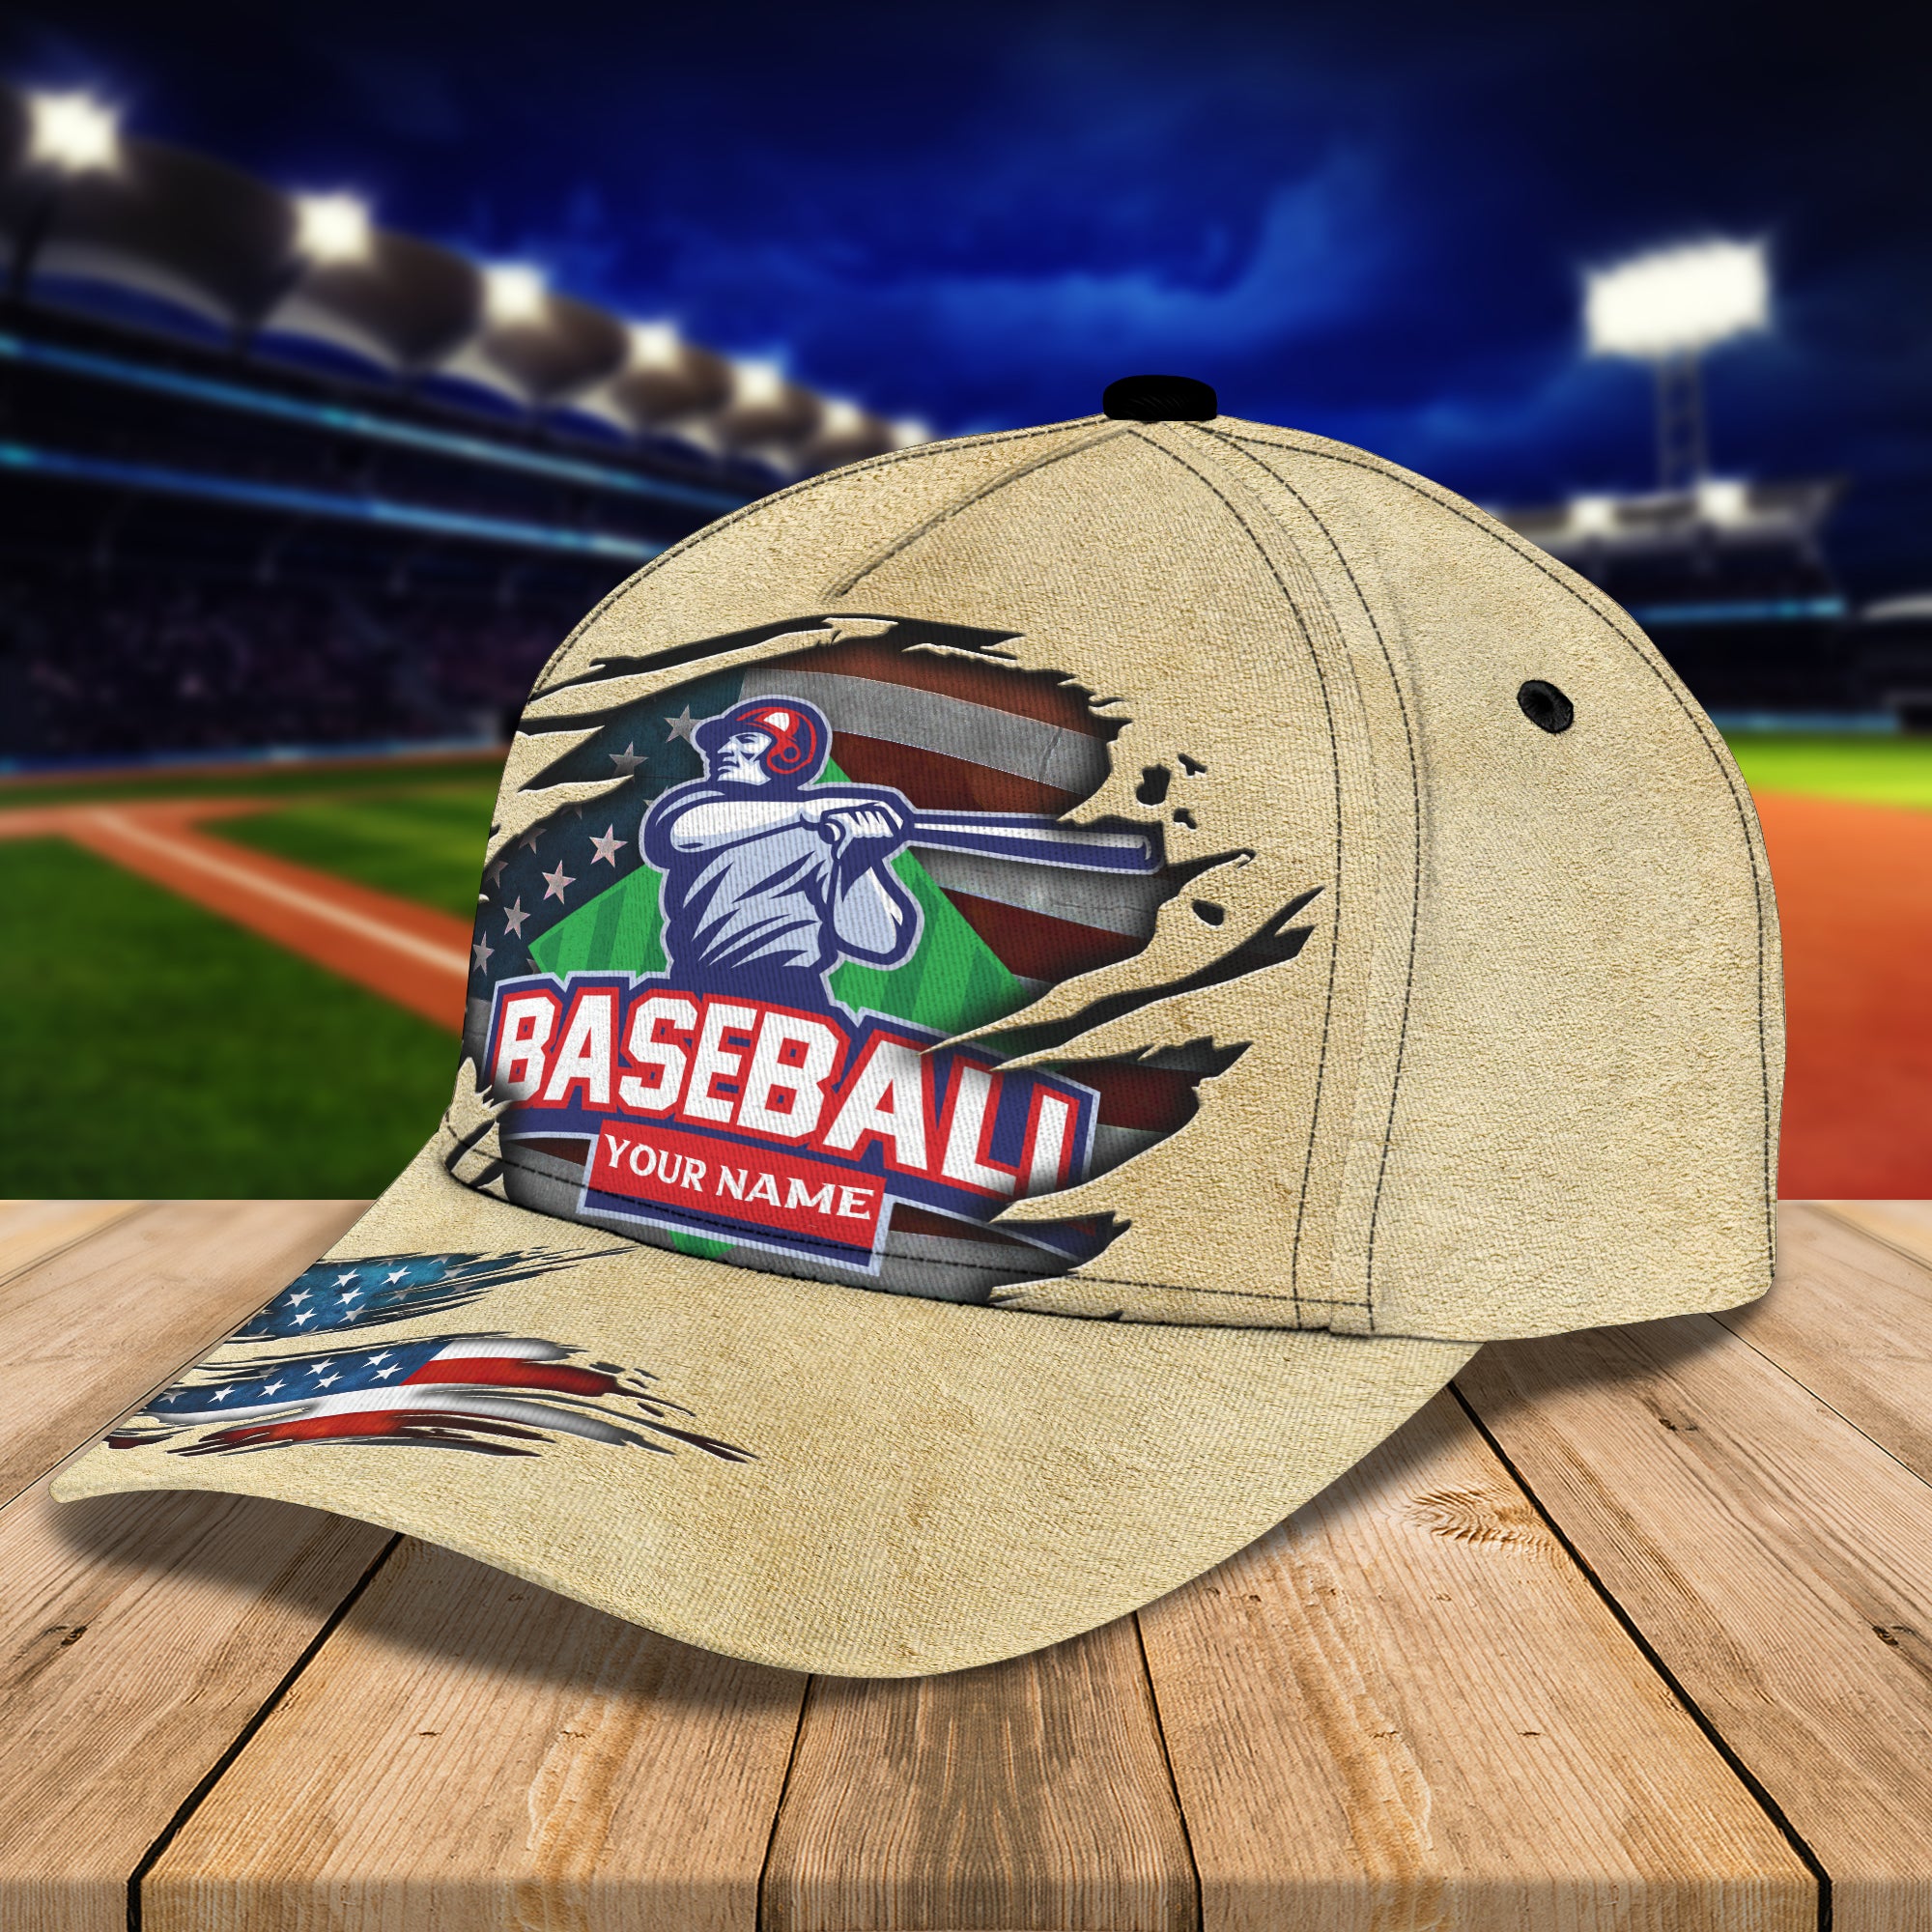 Baseball-two - Personalized Name Cap - Lst149